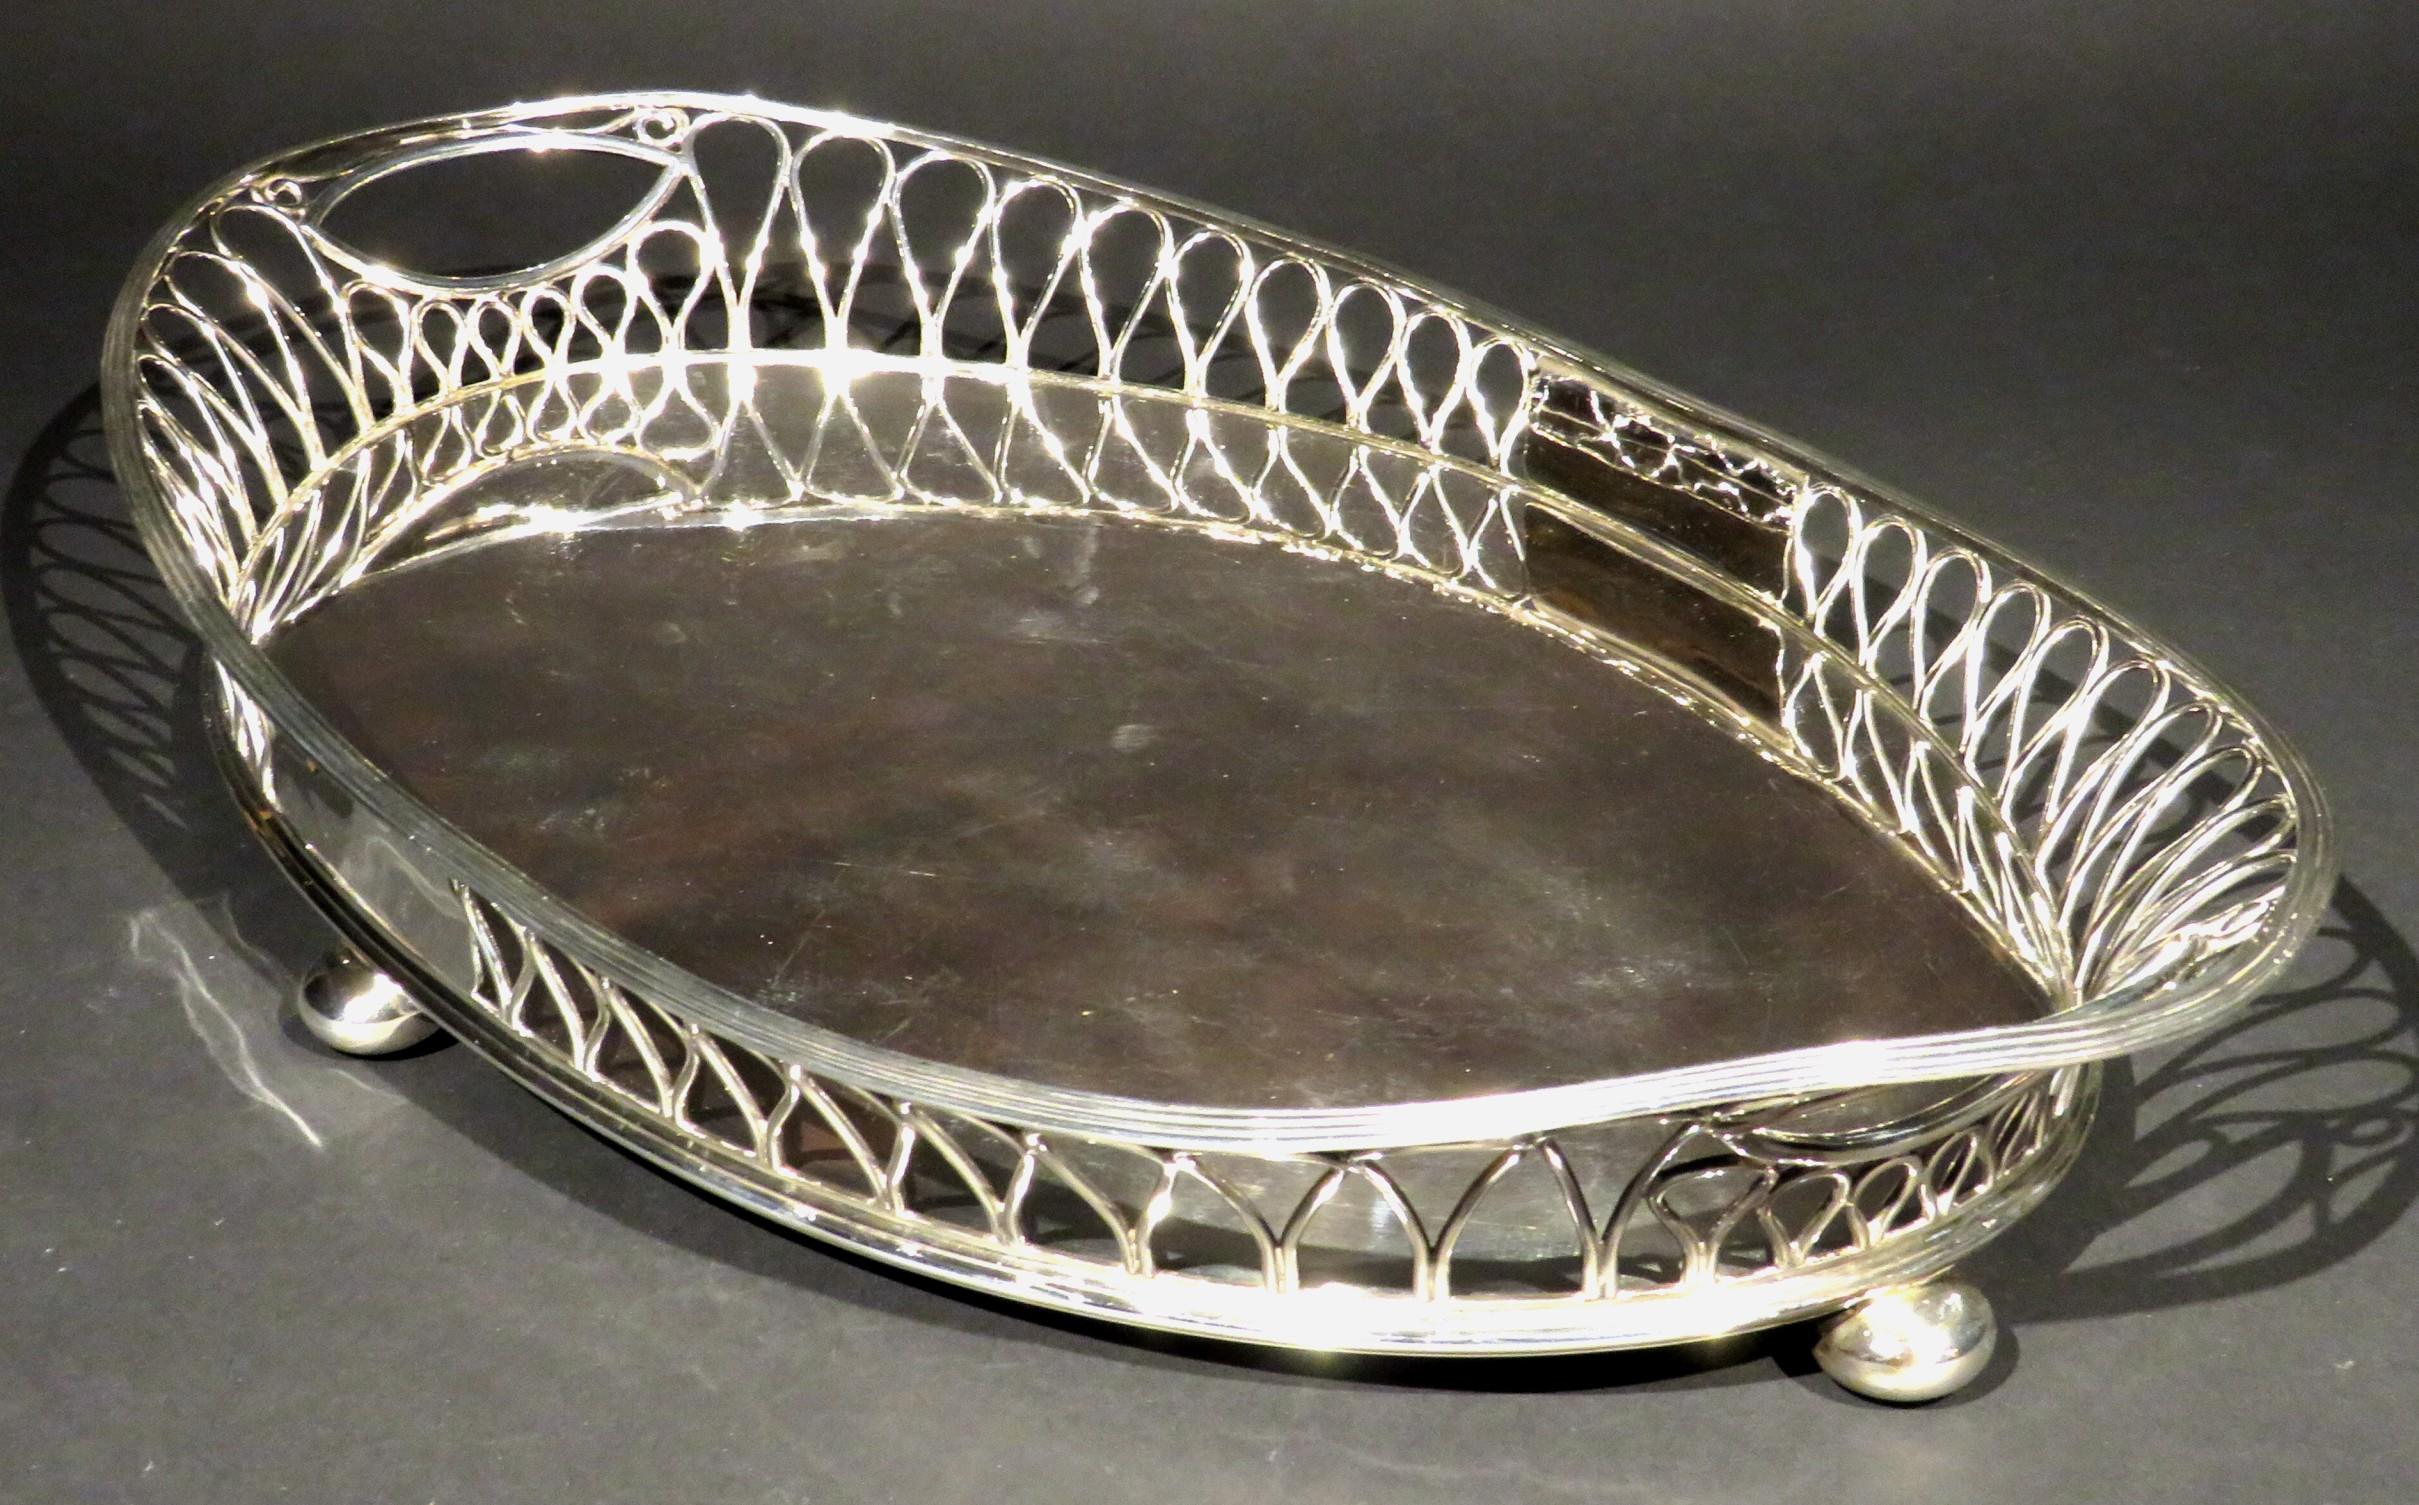 A very good & highly stylized Art Nouveau period silver plated gallery tray of navette form, showing an oval base surrounded by a striking open-work gallery of interlaced loop-shaped elements, rising up at both ends to open handles and raised